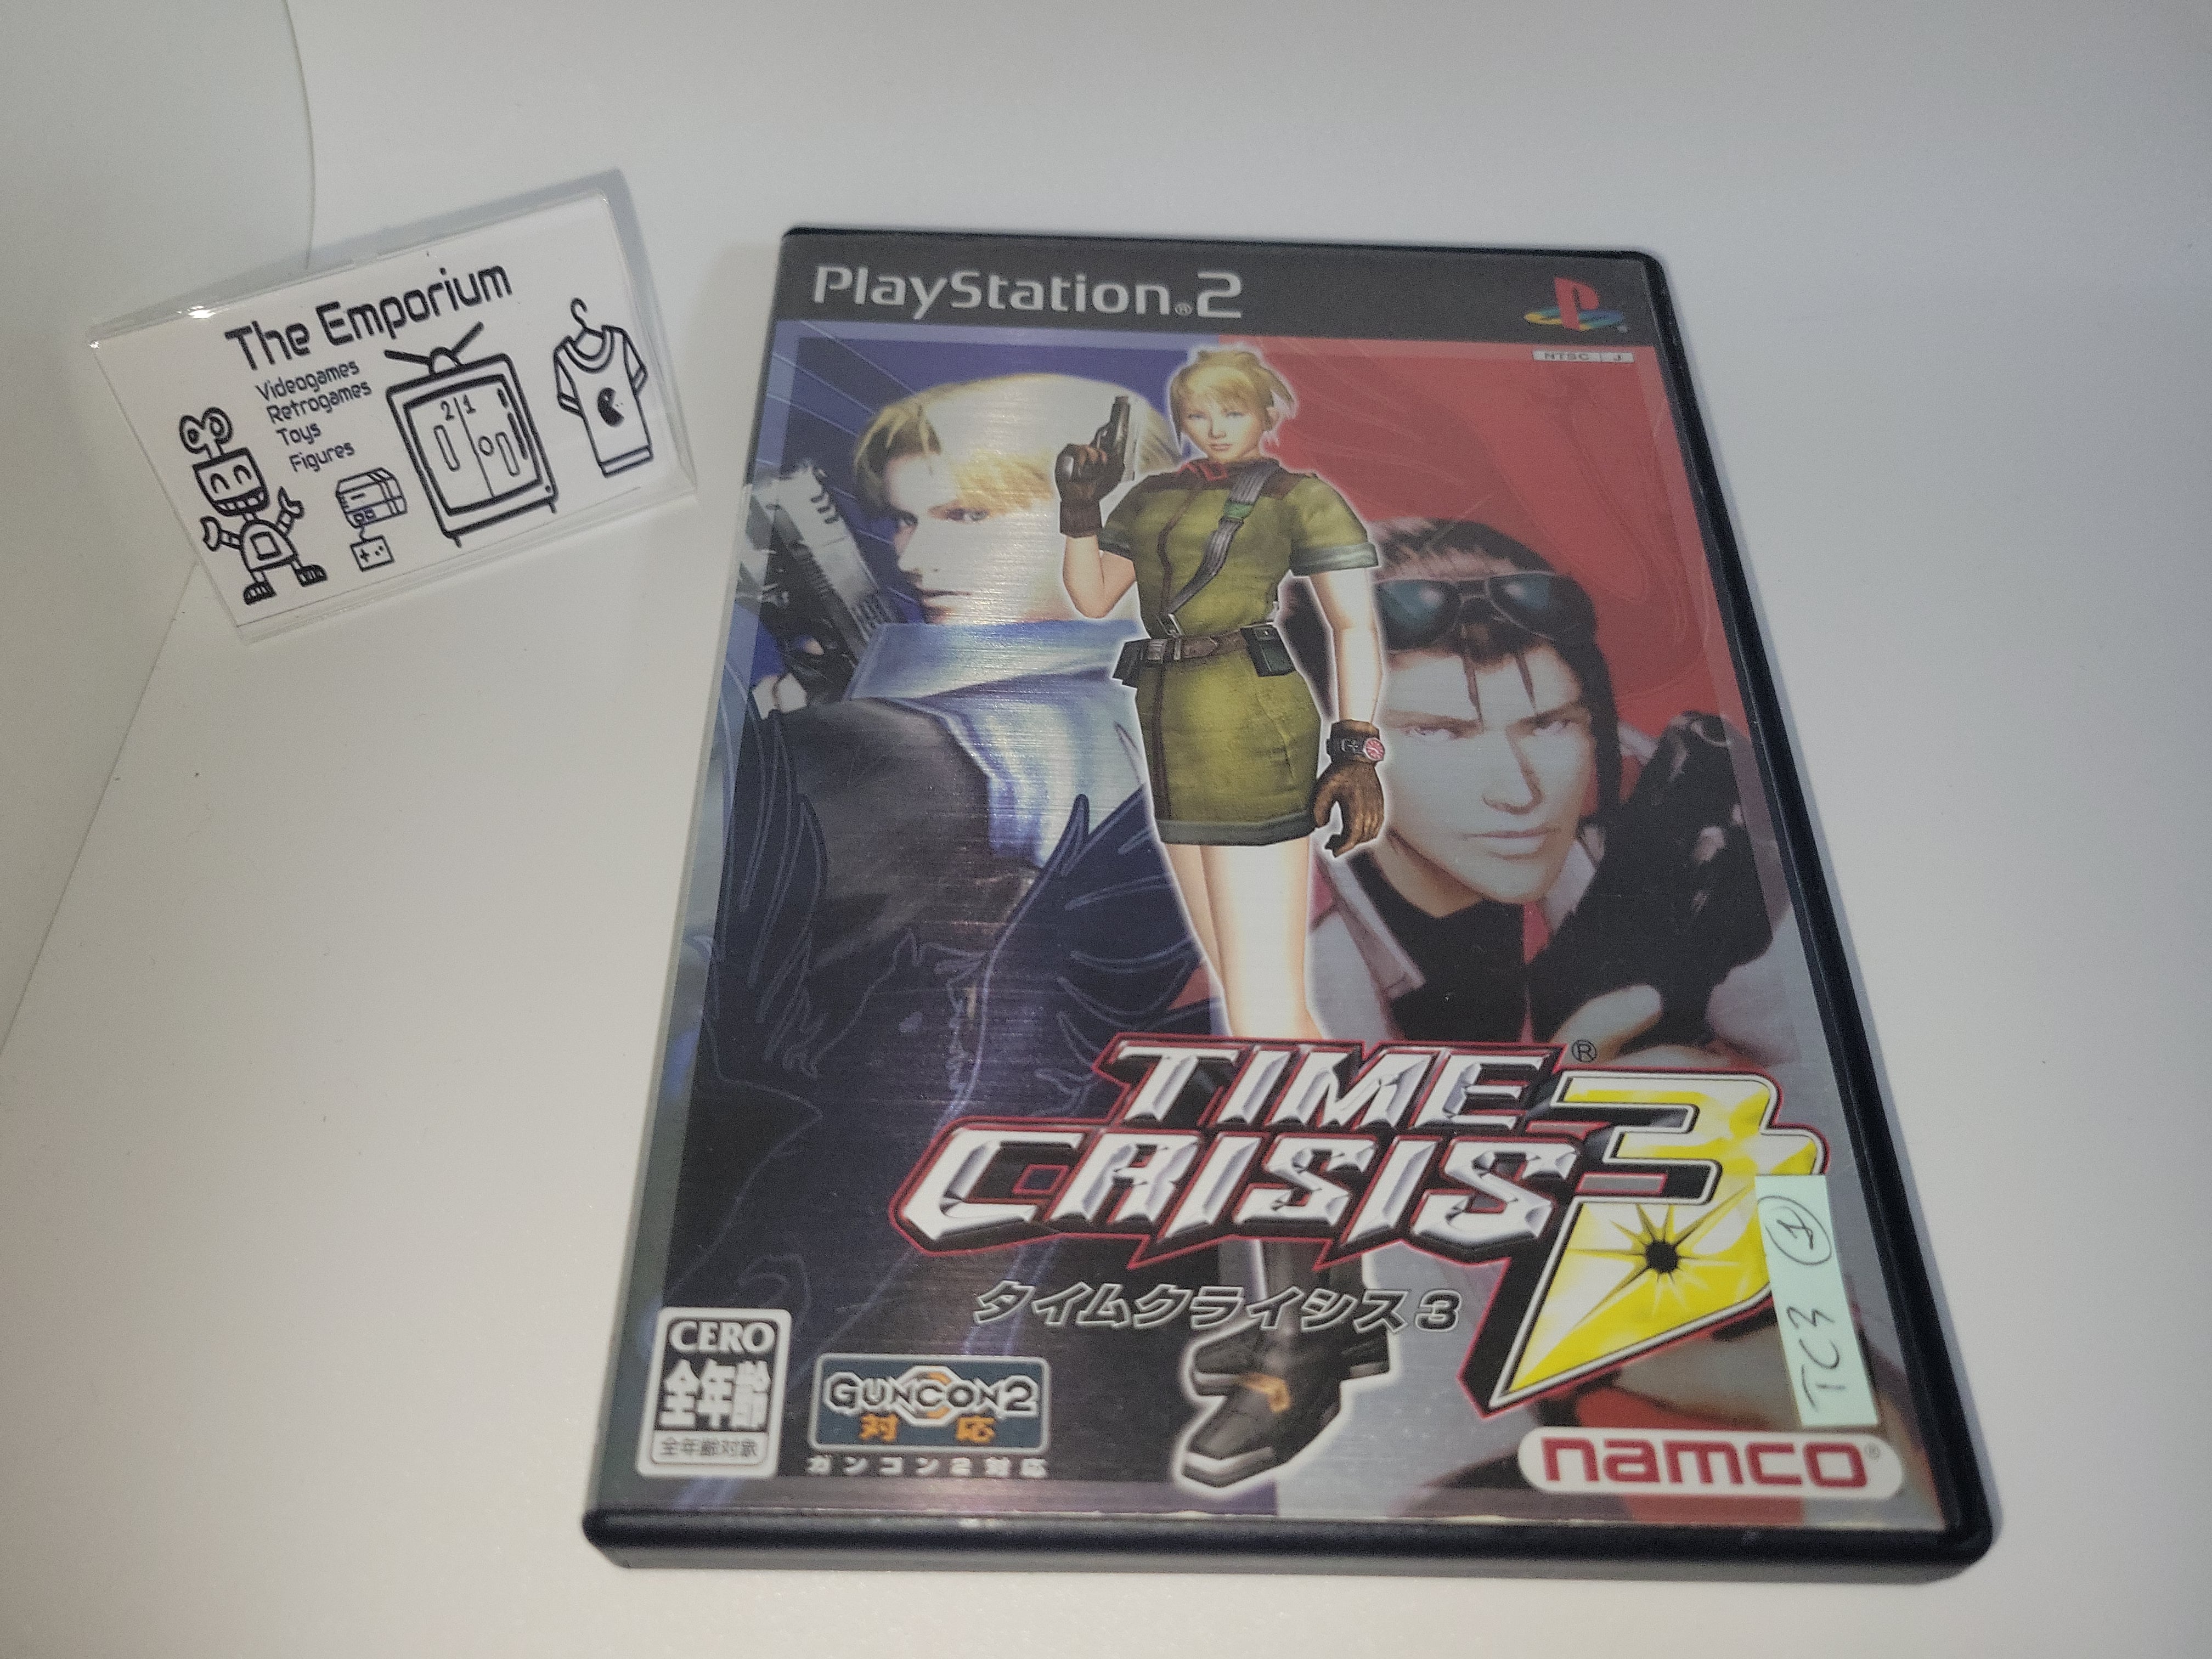 Time Crisis 3 - Sony playstation 2 – The Emporium RetroGames and Toys